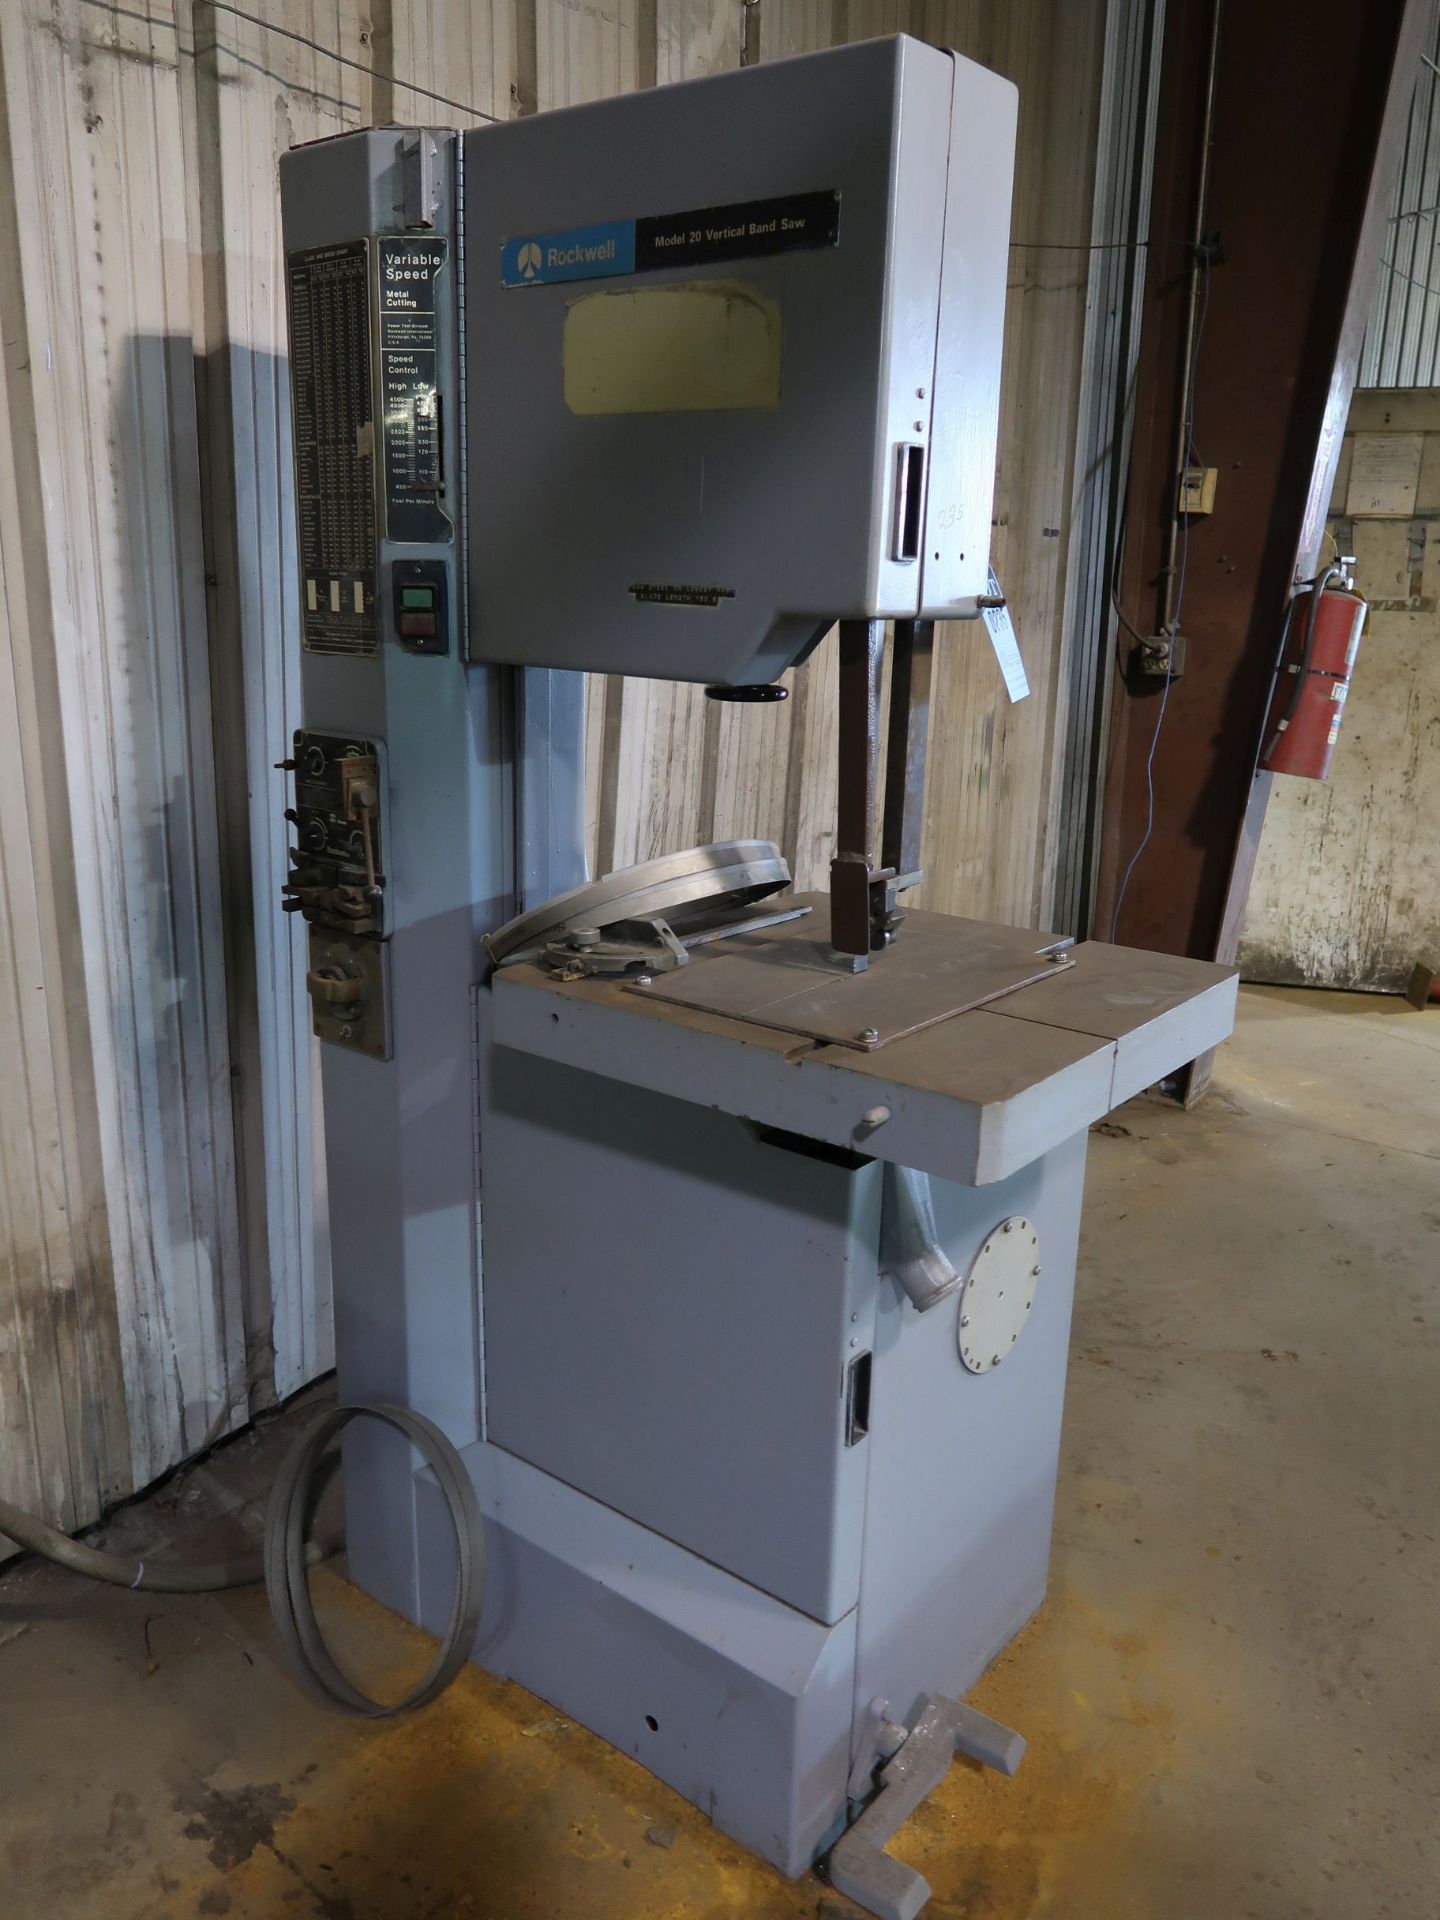 20" ROCKWELL MODEL 20 VARIABLE SPEED VERTICAL BAND SAW; s/n 1793658, WITH BLADE WELDER - Image 2 of 5